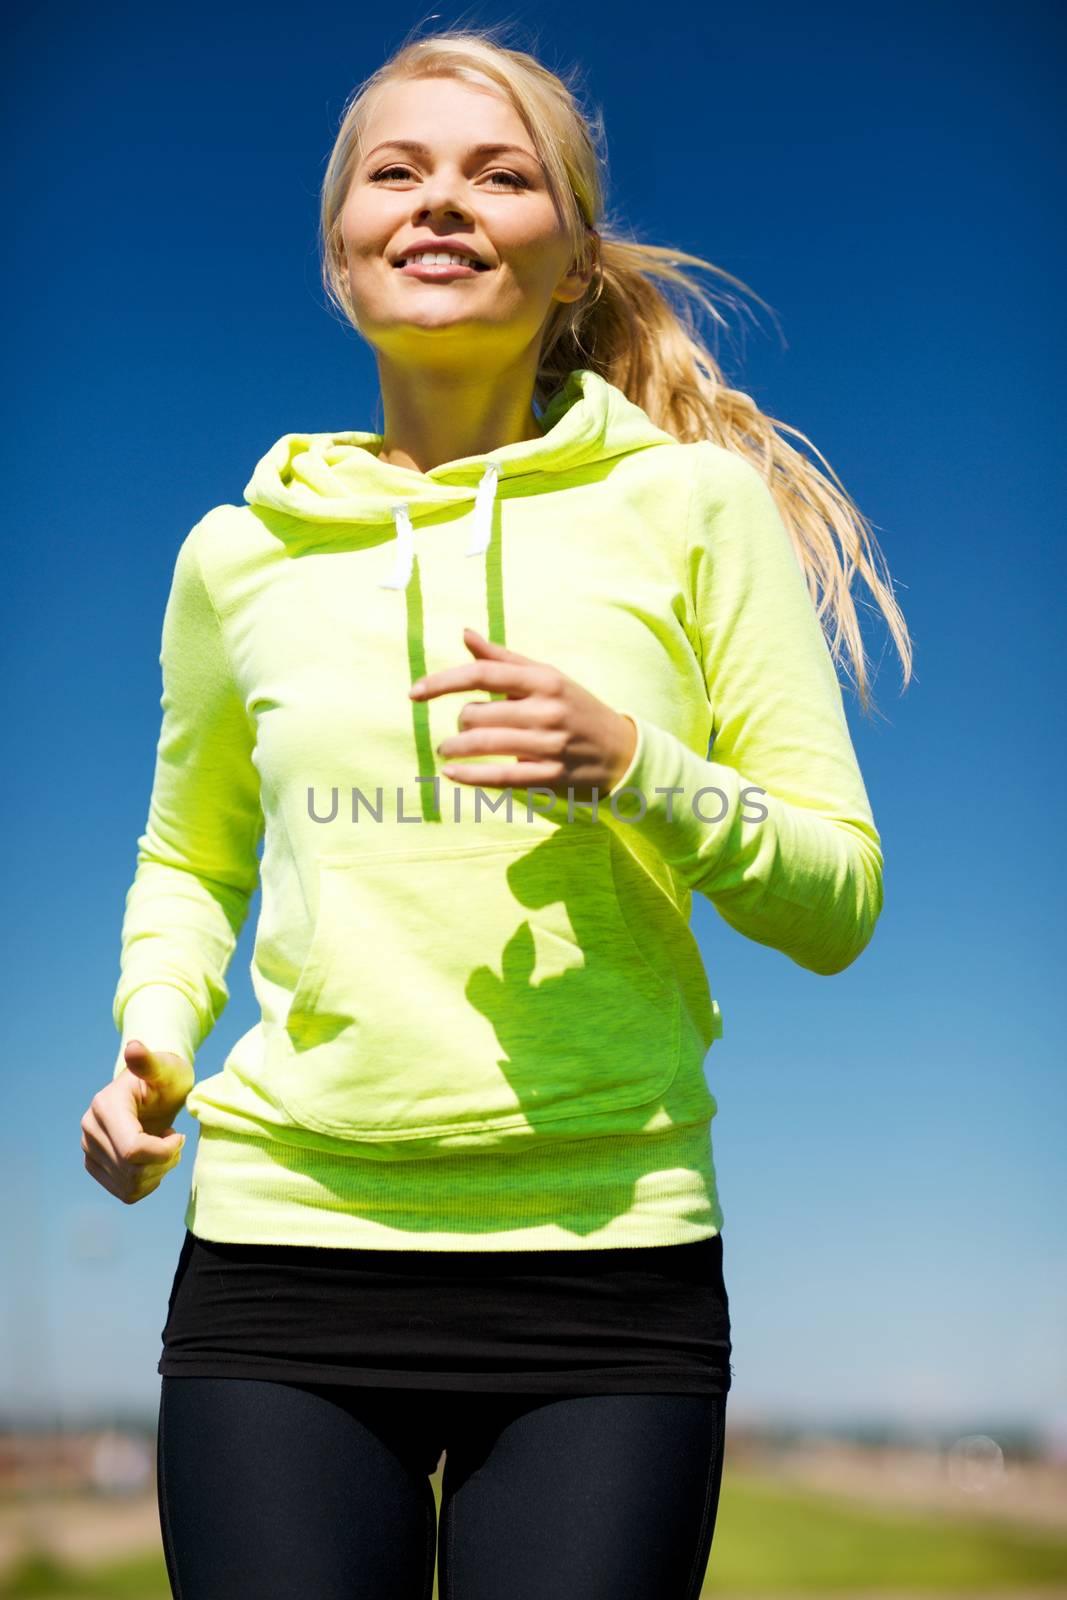 fitness and lifestyle concept - female runner jogging outdoors